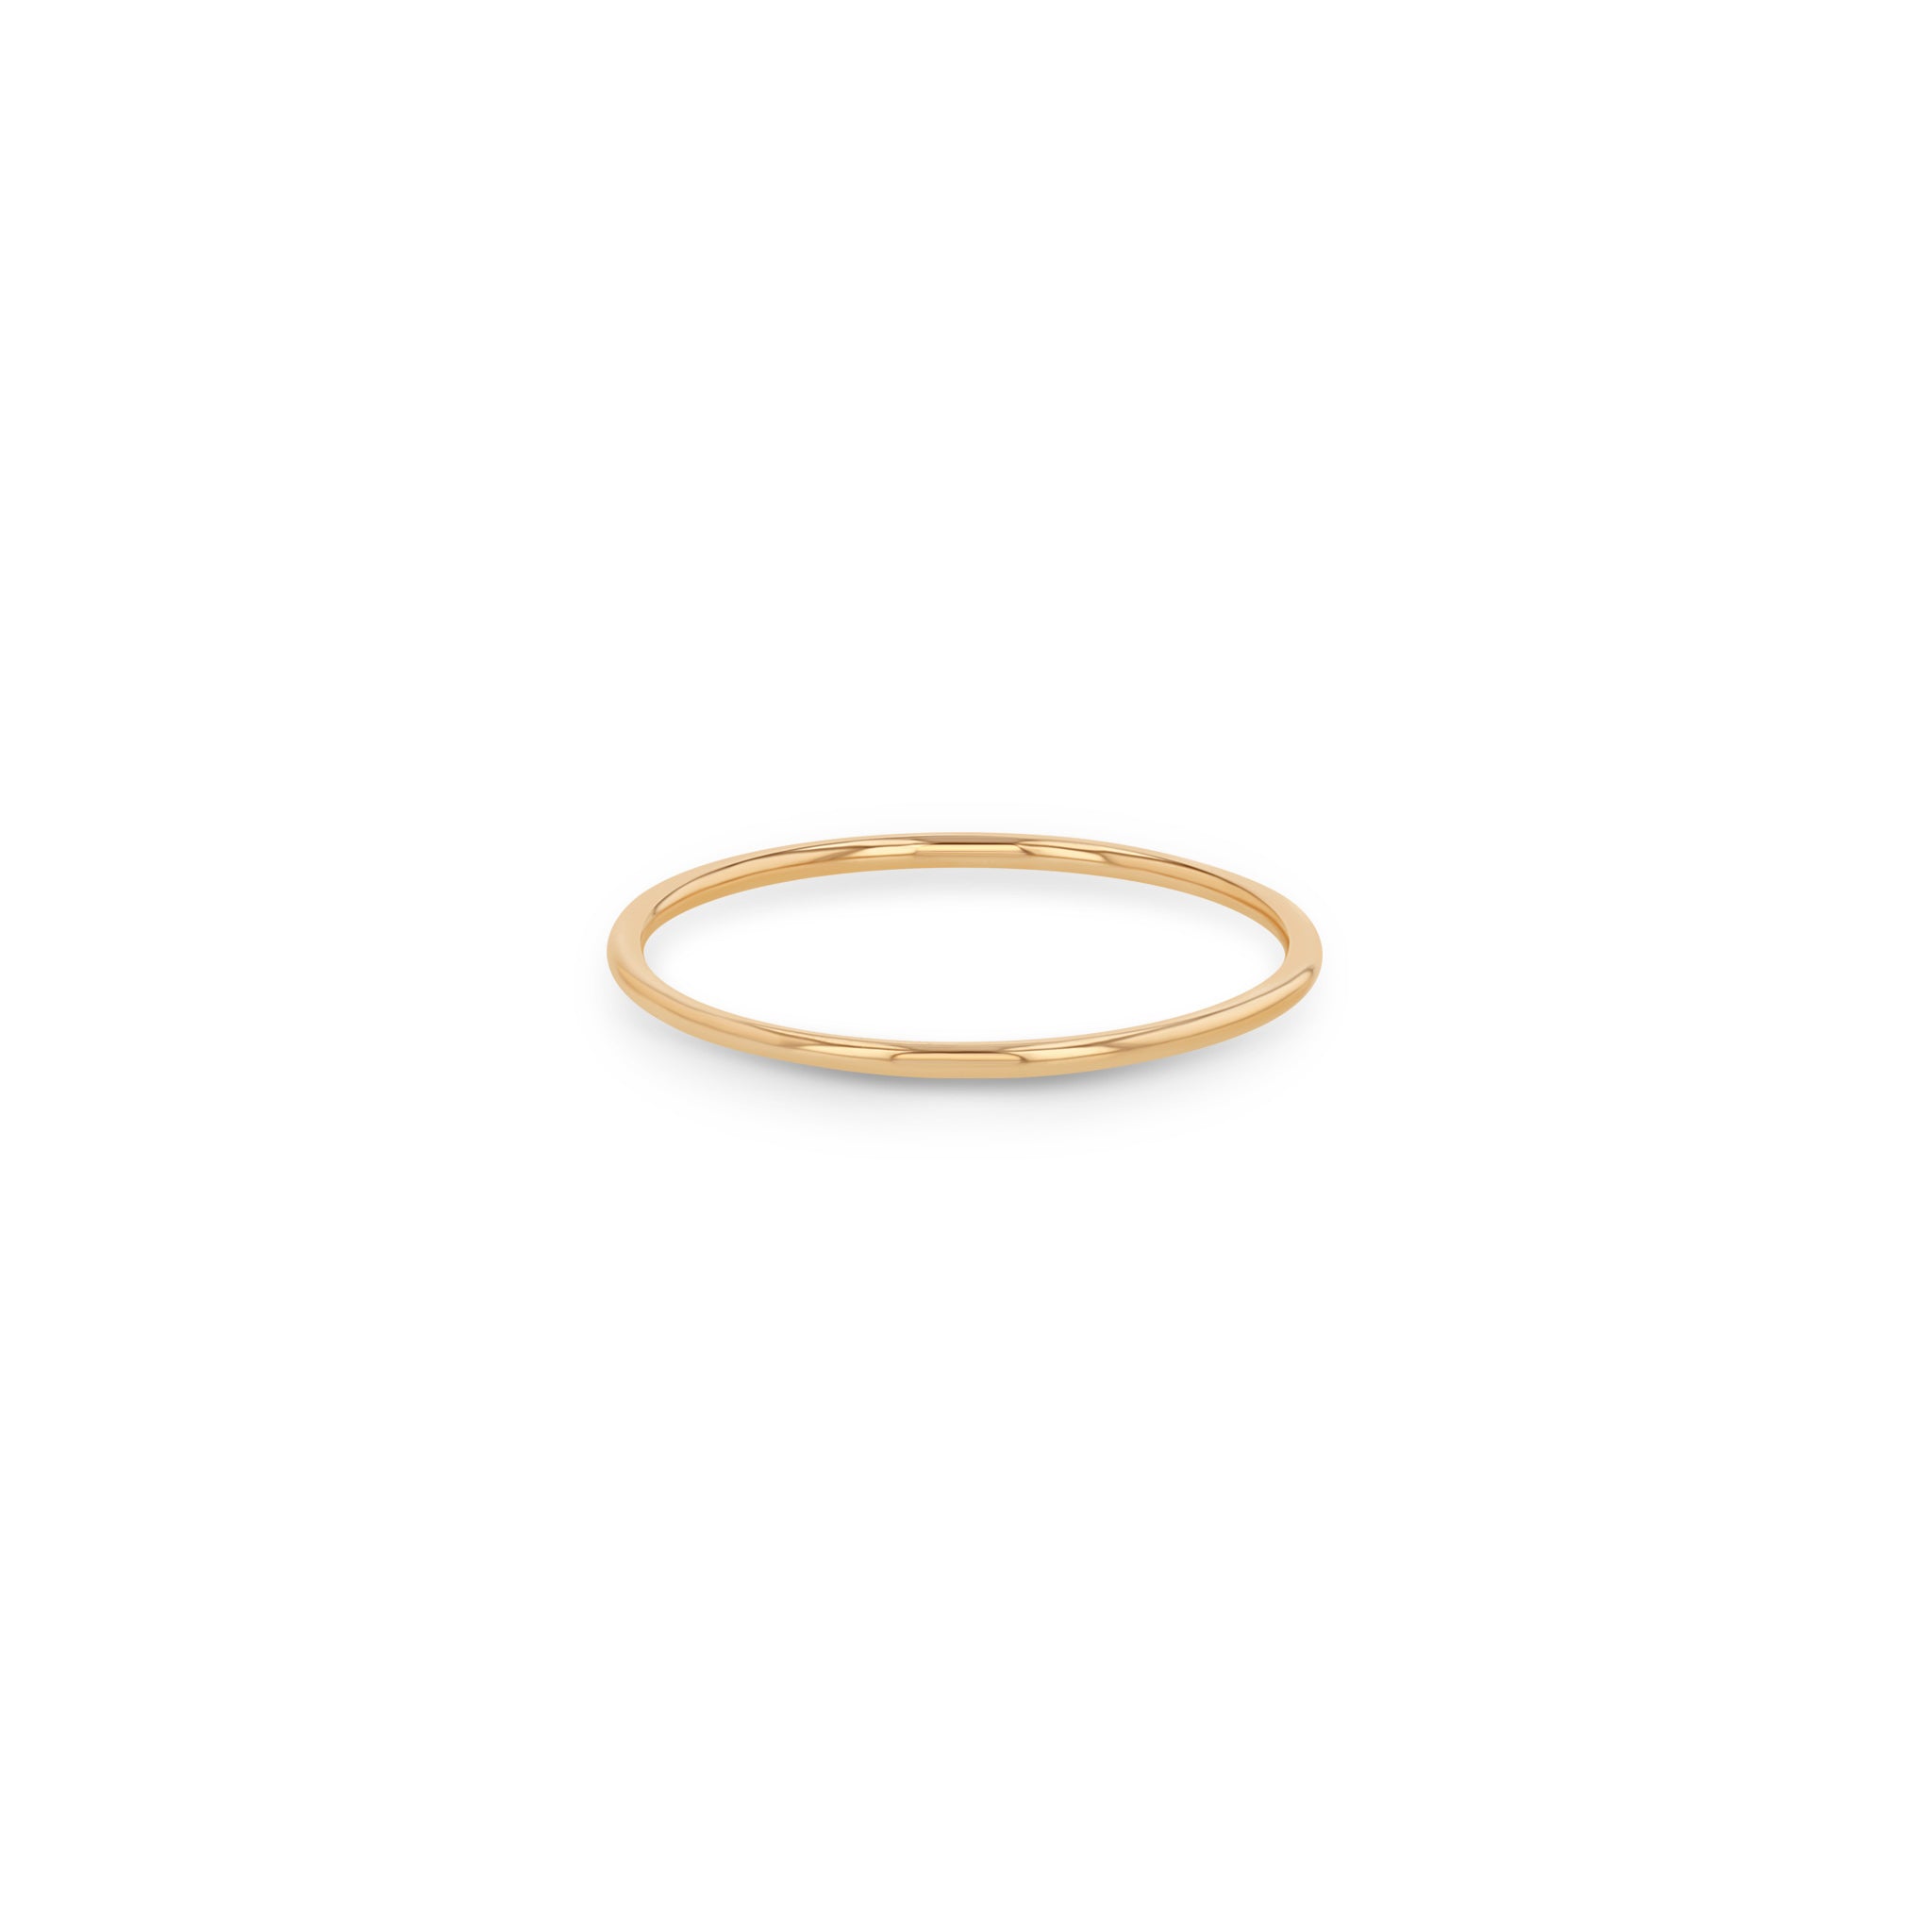 Hammered Wedding Stacking Band Ring in Your Choice of 14K Gold – Midwinter  Co. Alternative Bridal Rings and Modern Fine Jewelry